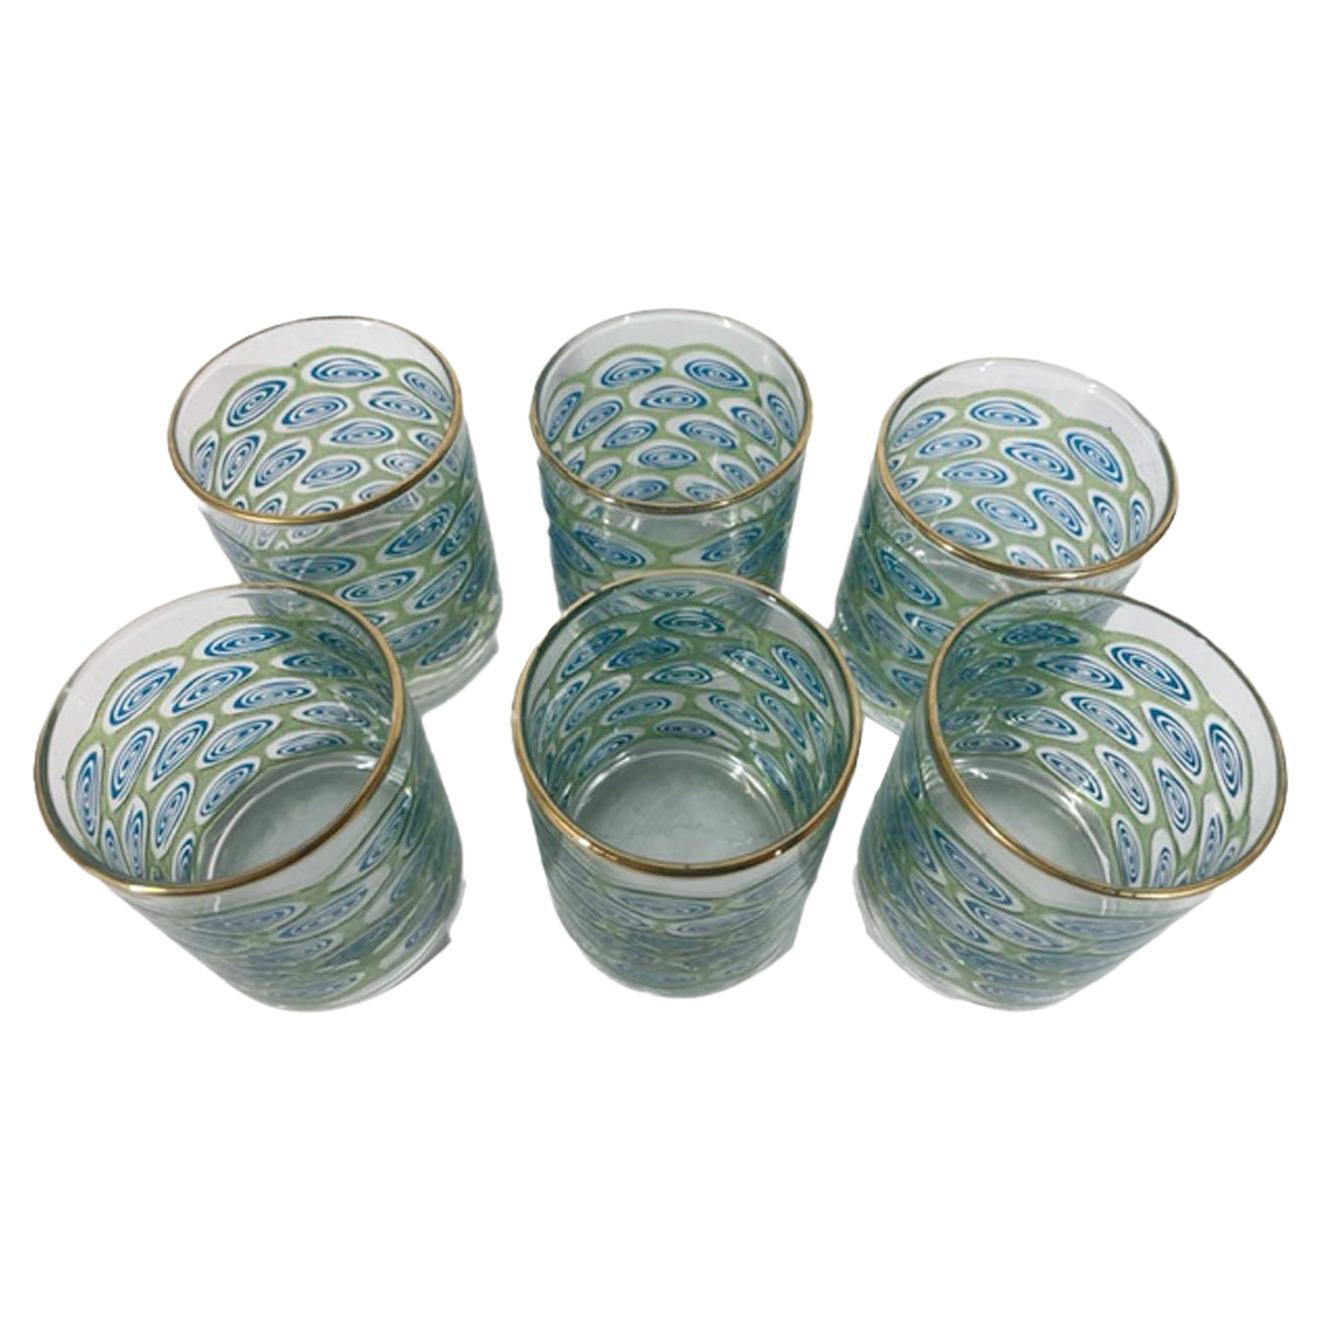 https://a.1stdibscdn.com/six-mid-century-libbey-glassware-rocks-glasses-in-the-peacock-feather-pattern-for-sale/f_13752/f_287868221653344976522/f_28786822_1653344976932_bg_processed.jpg